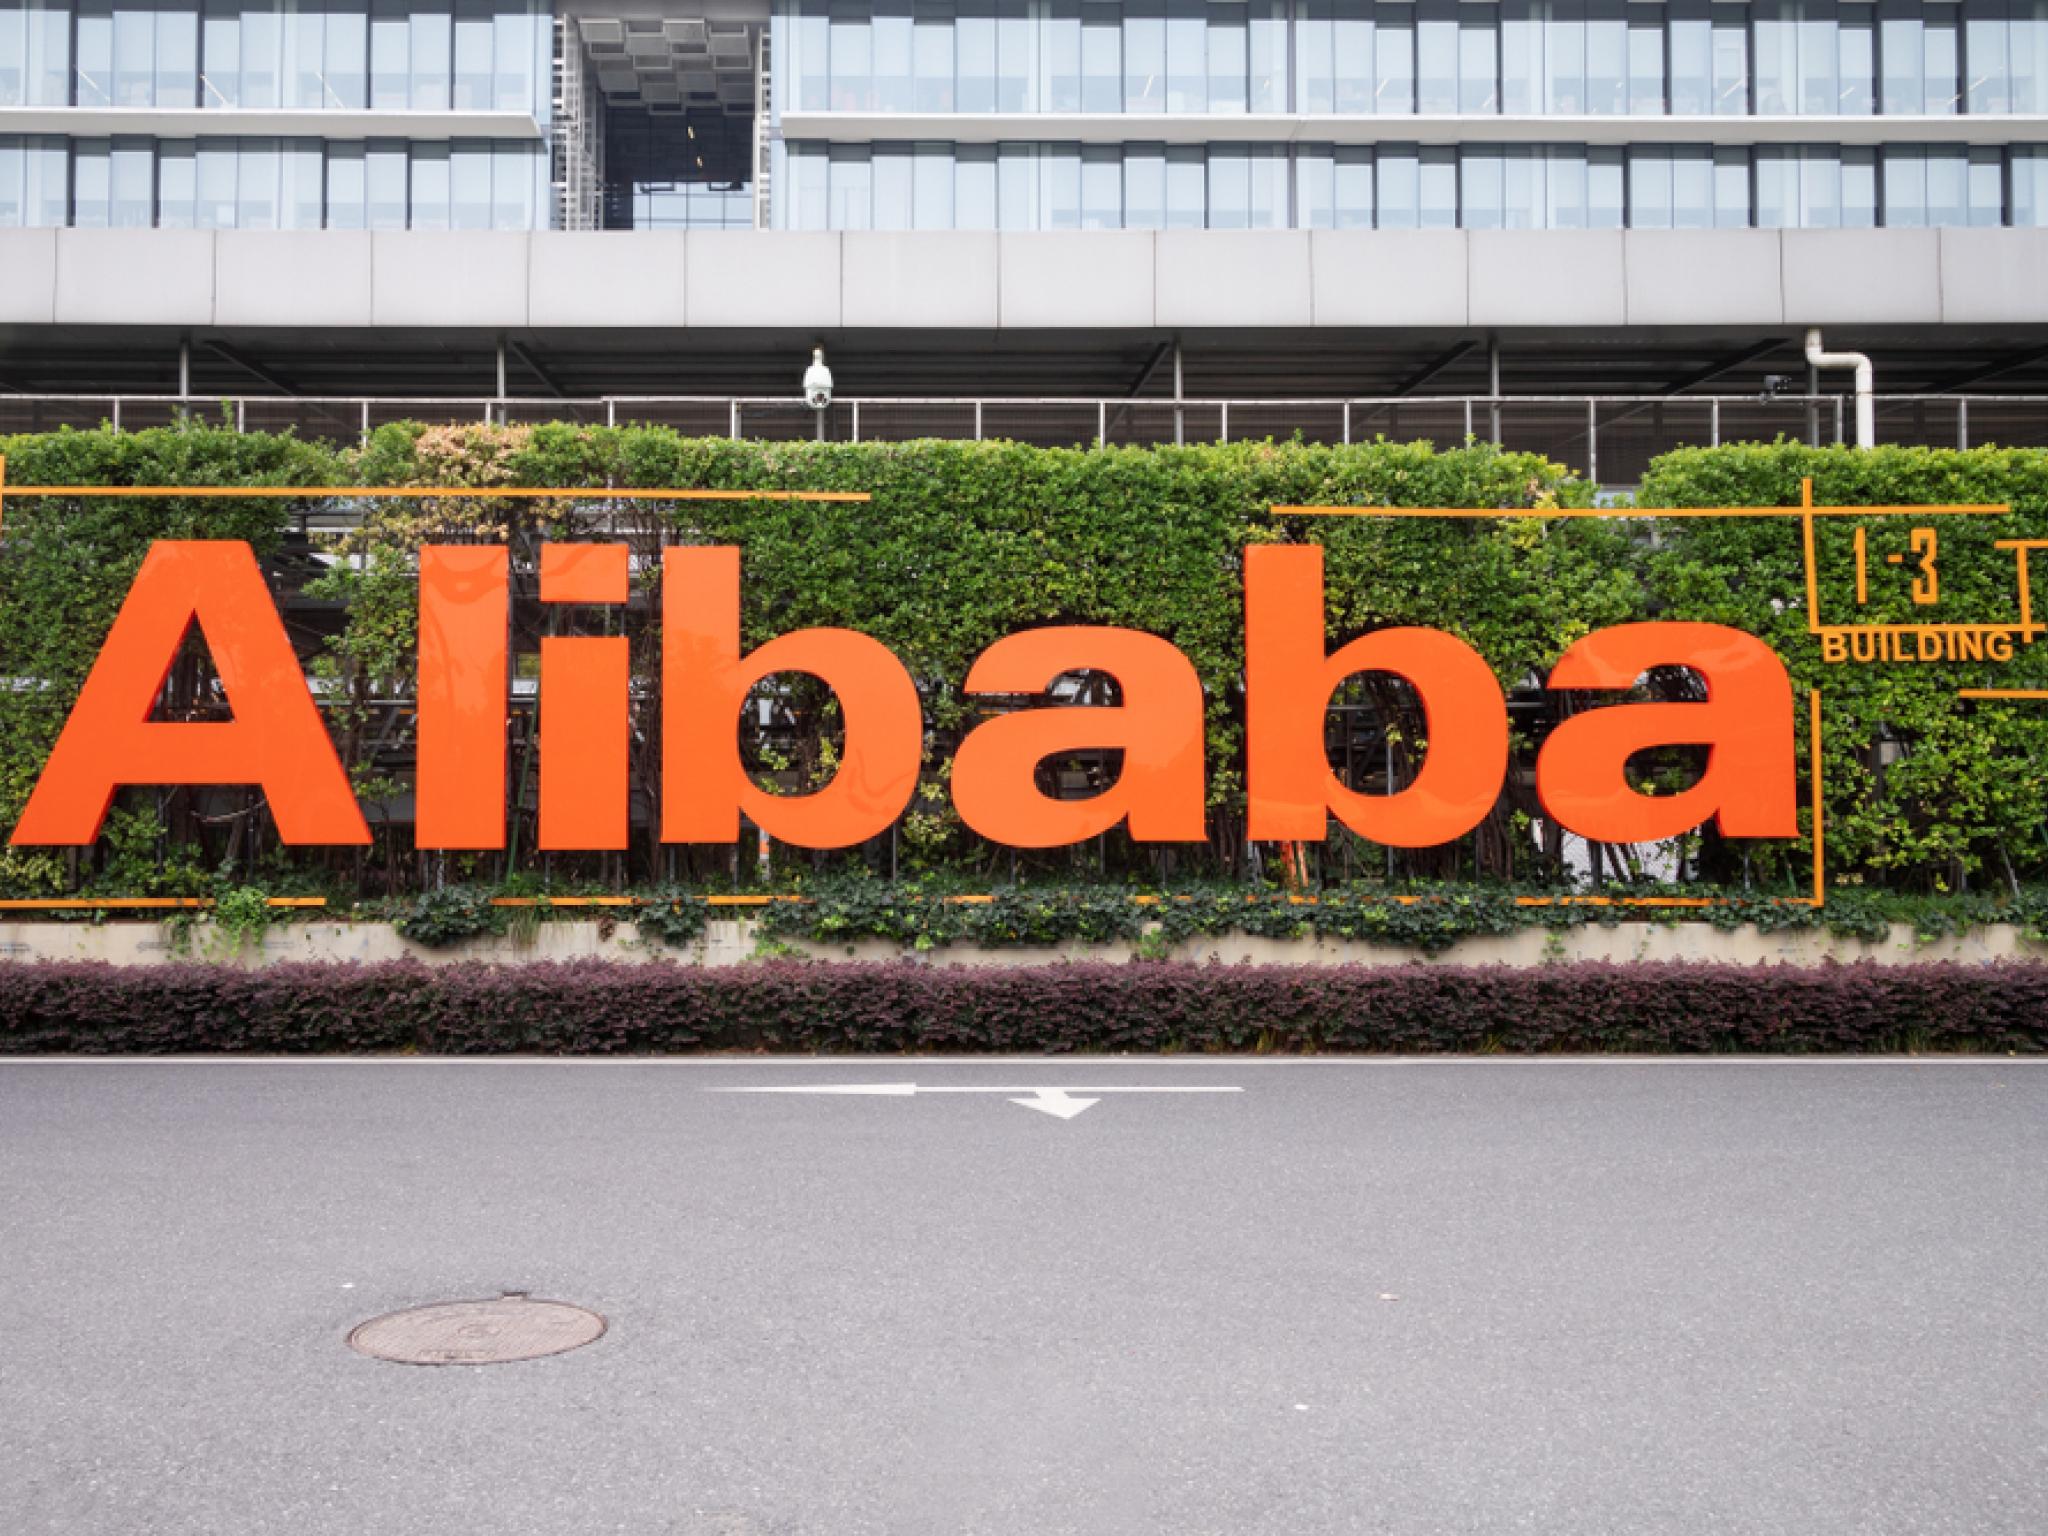  whats-going-on-with-alibaba-and-chinese-peer-stocks-tuesday 